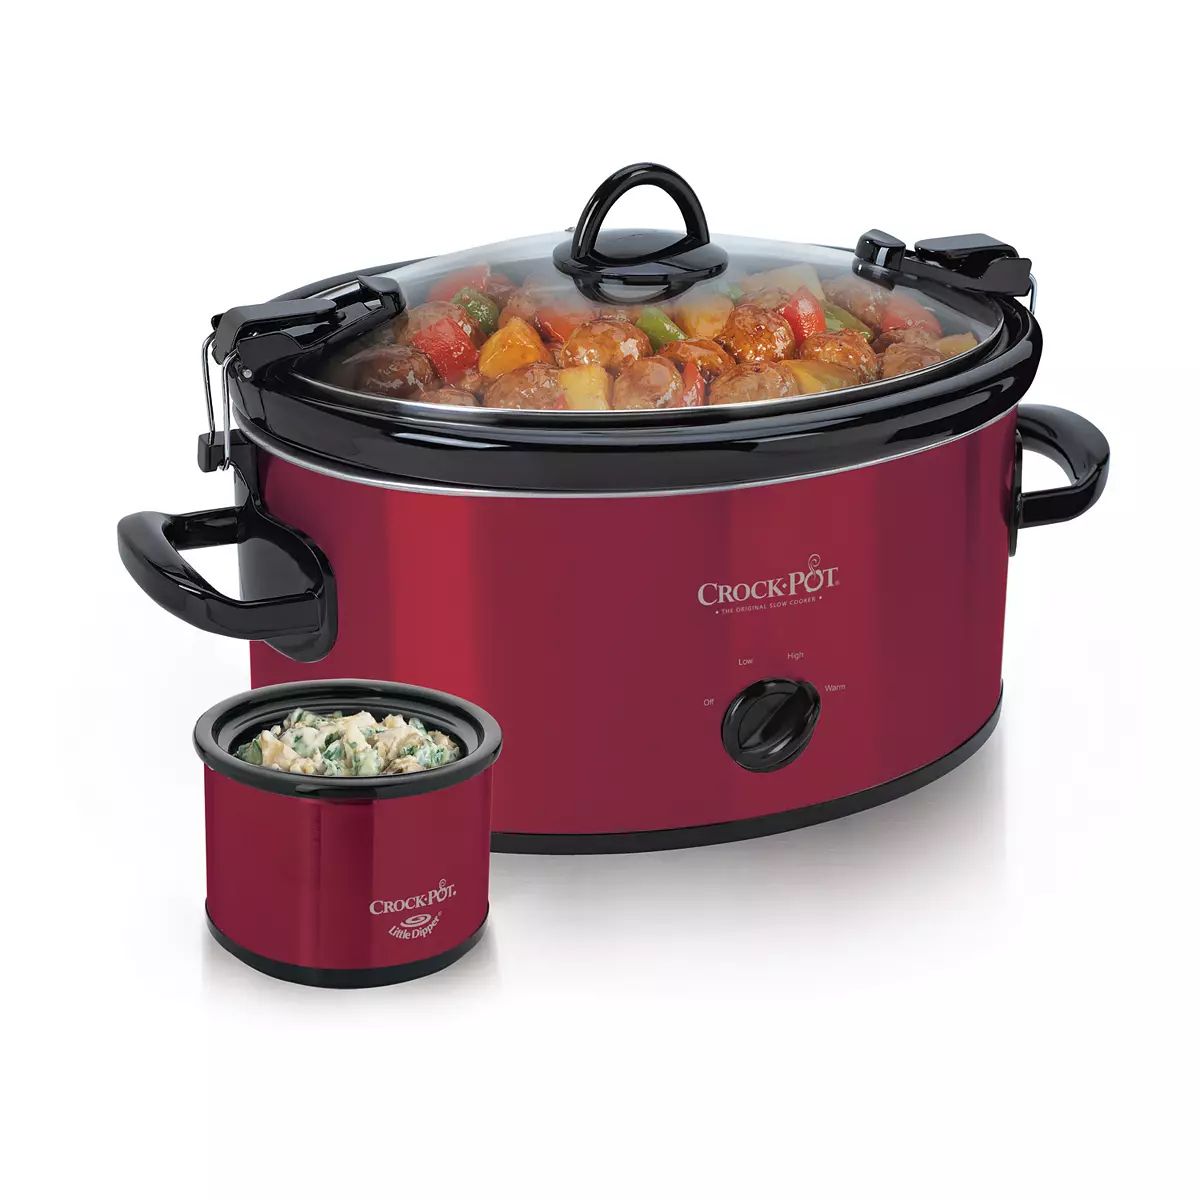 Crockpot™ 6-qt. Cook & Carry Manual Slow Cooker with Little Dipper Warmer | Kohl's